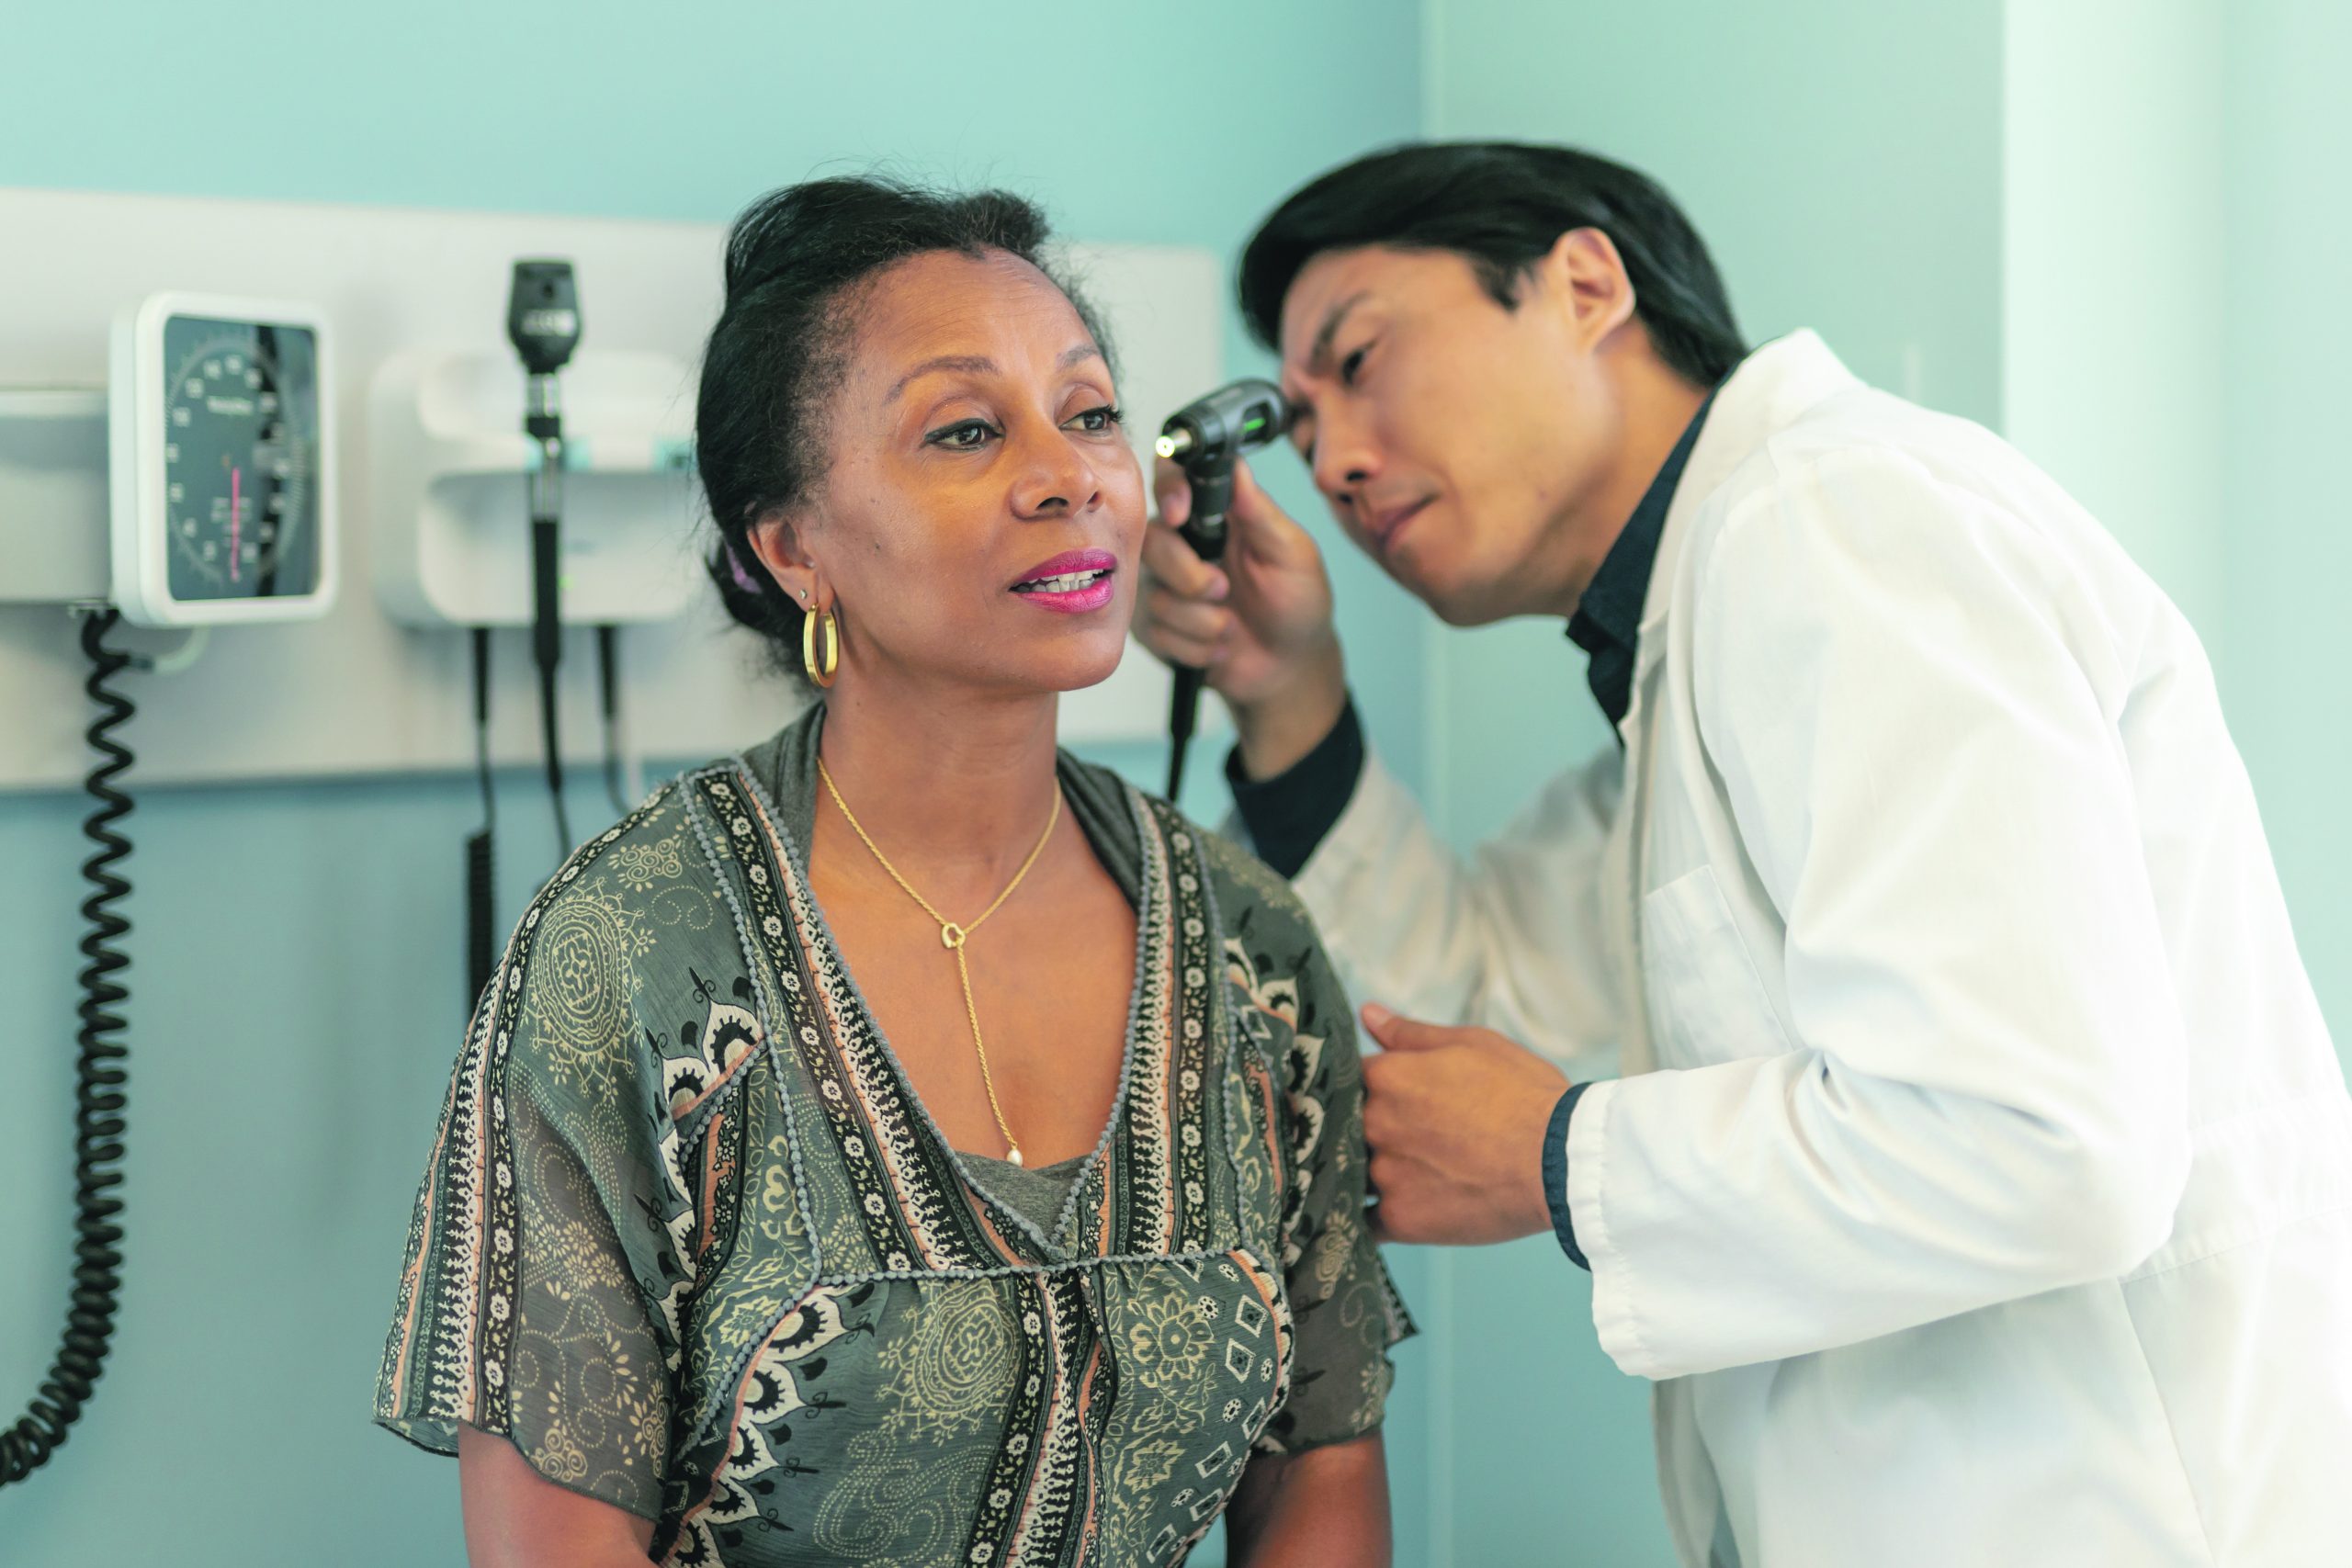 A senior woman of African descent is at a routine medical appointment. The patient is sitting on a medical examination table in a clinic. Her male Korean doctor is checking her ears. The woman has had changes with her hearing recently. She is finding out if she needs hearing aids.